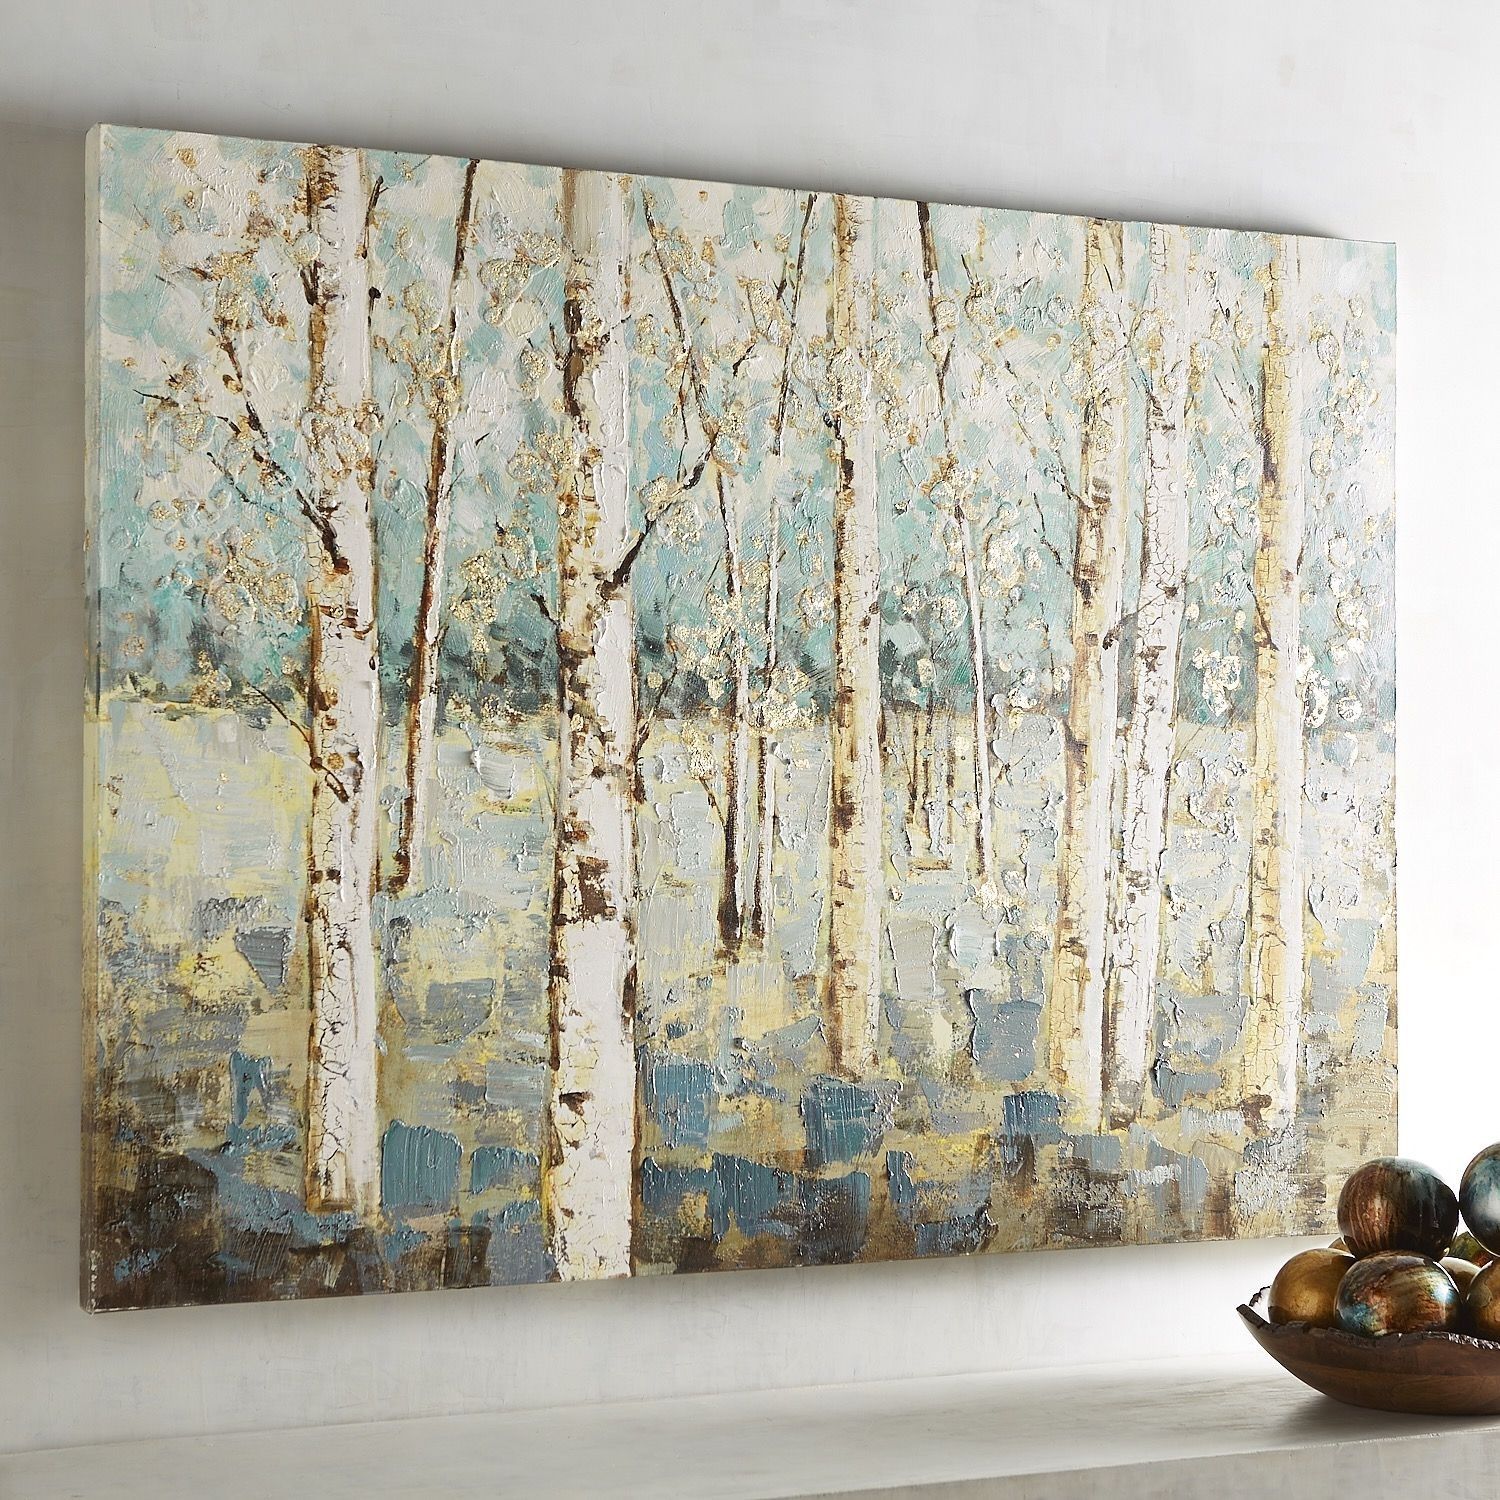 Shades Of Blue Birch Tree Wall Art | Products | Pinterest | Tree Art With Birch Tree Wall Art (Photo 5 of 20)